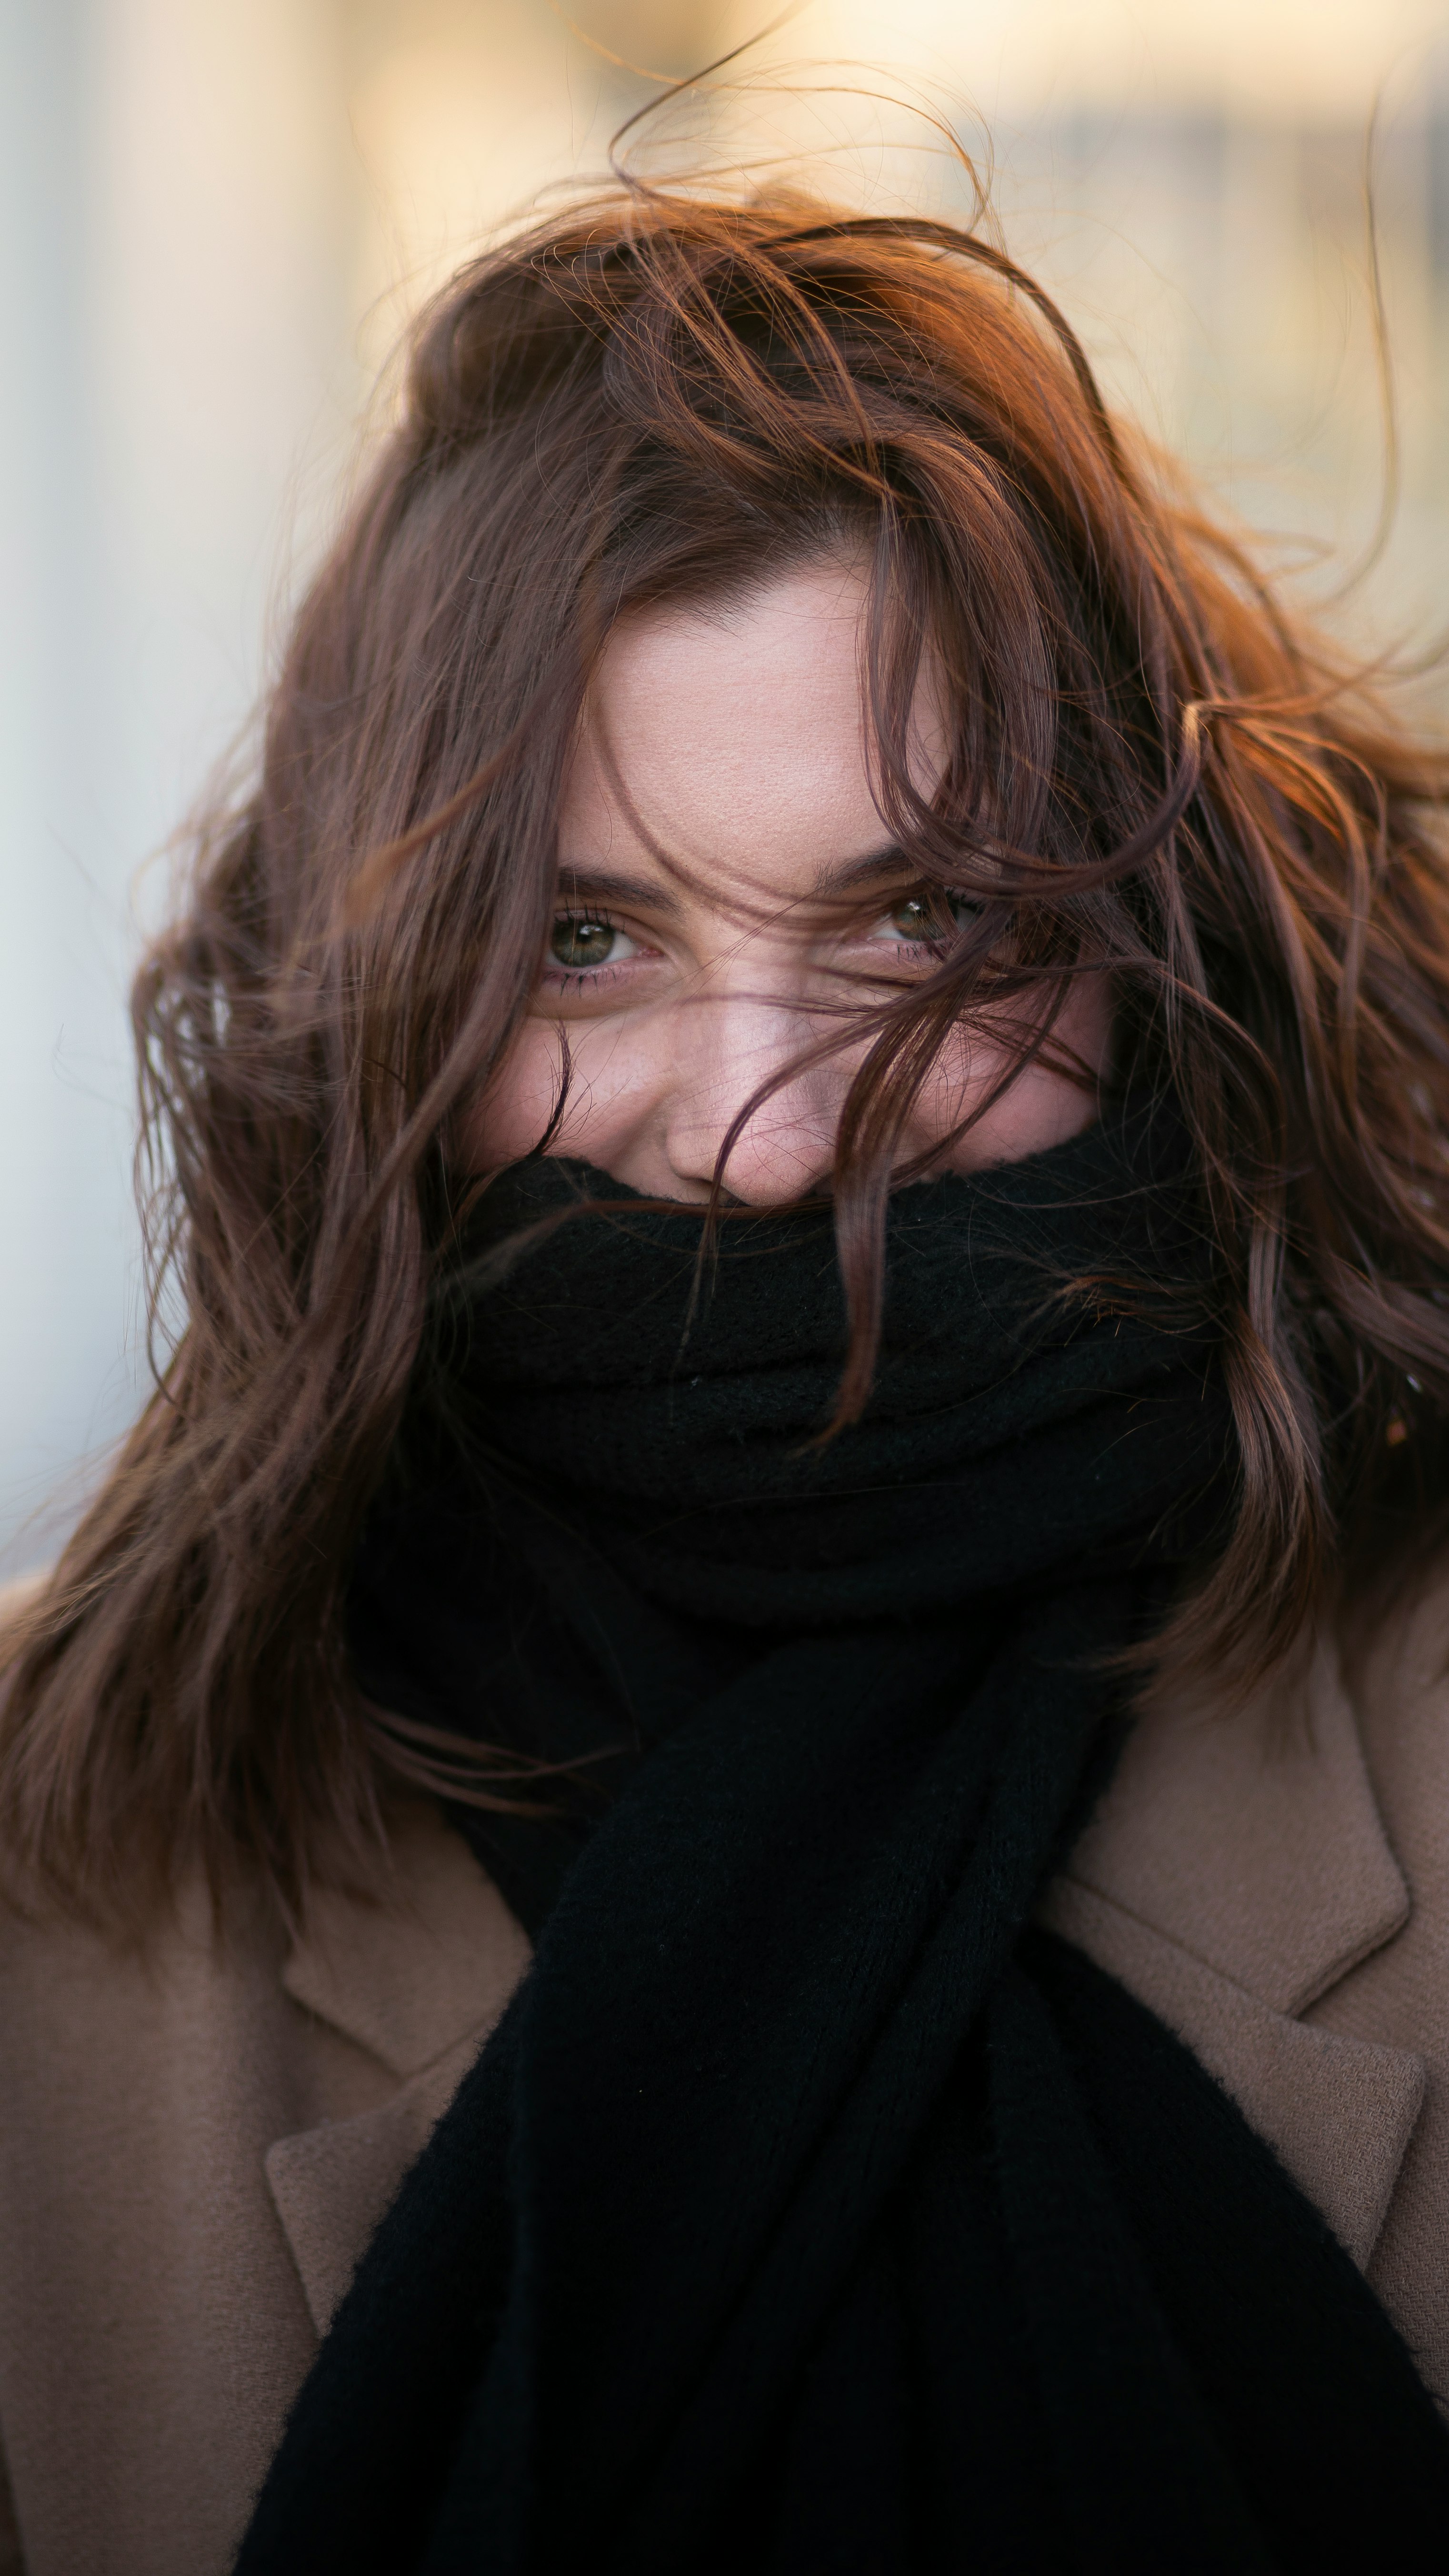 woman smiling and looking at the camera with scarf covering her mouth